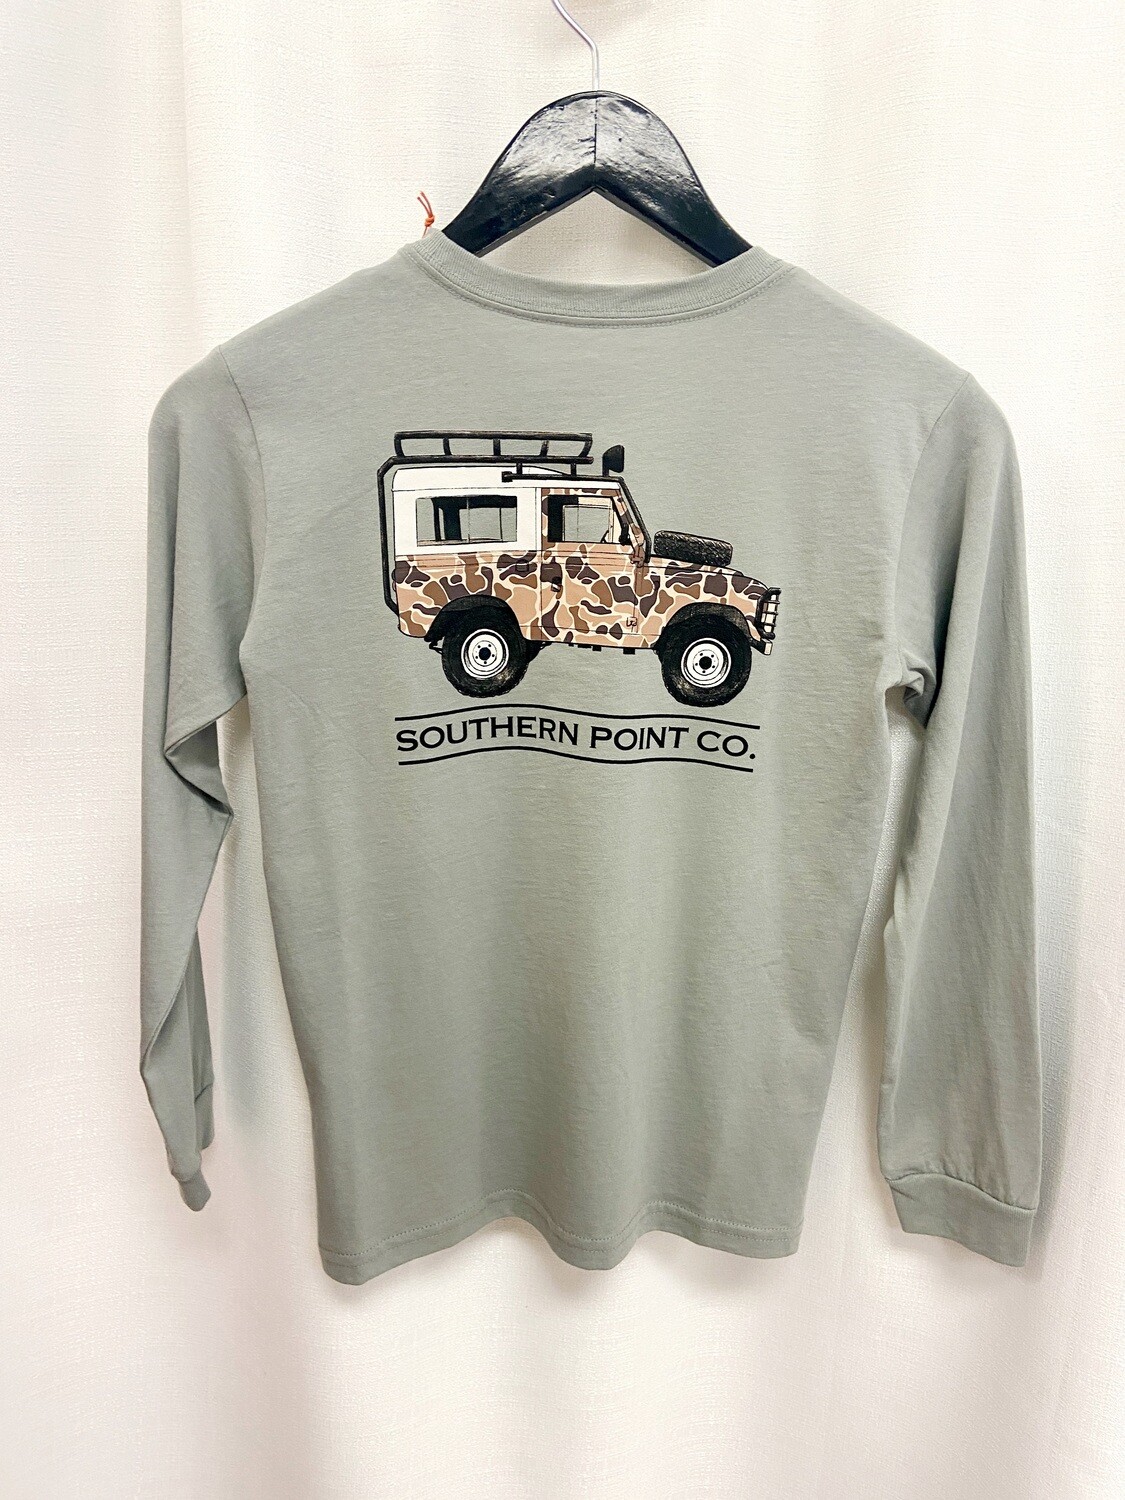 Southern Point Co. Defender 90 Tee